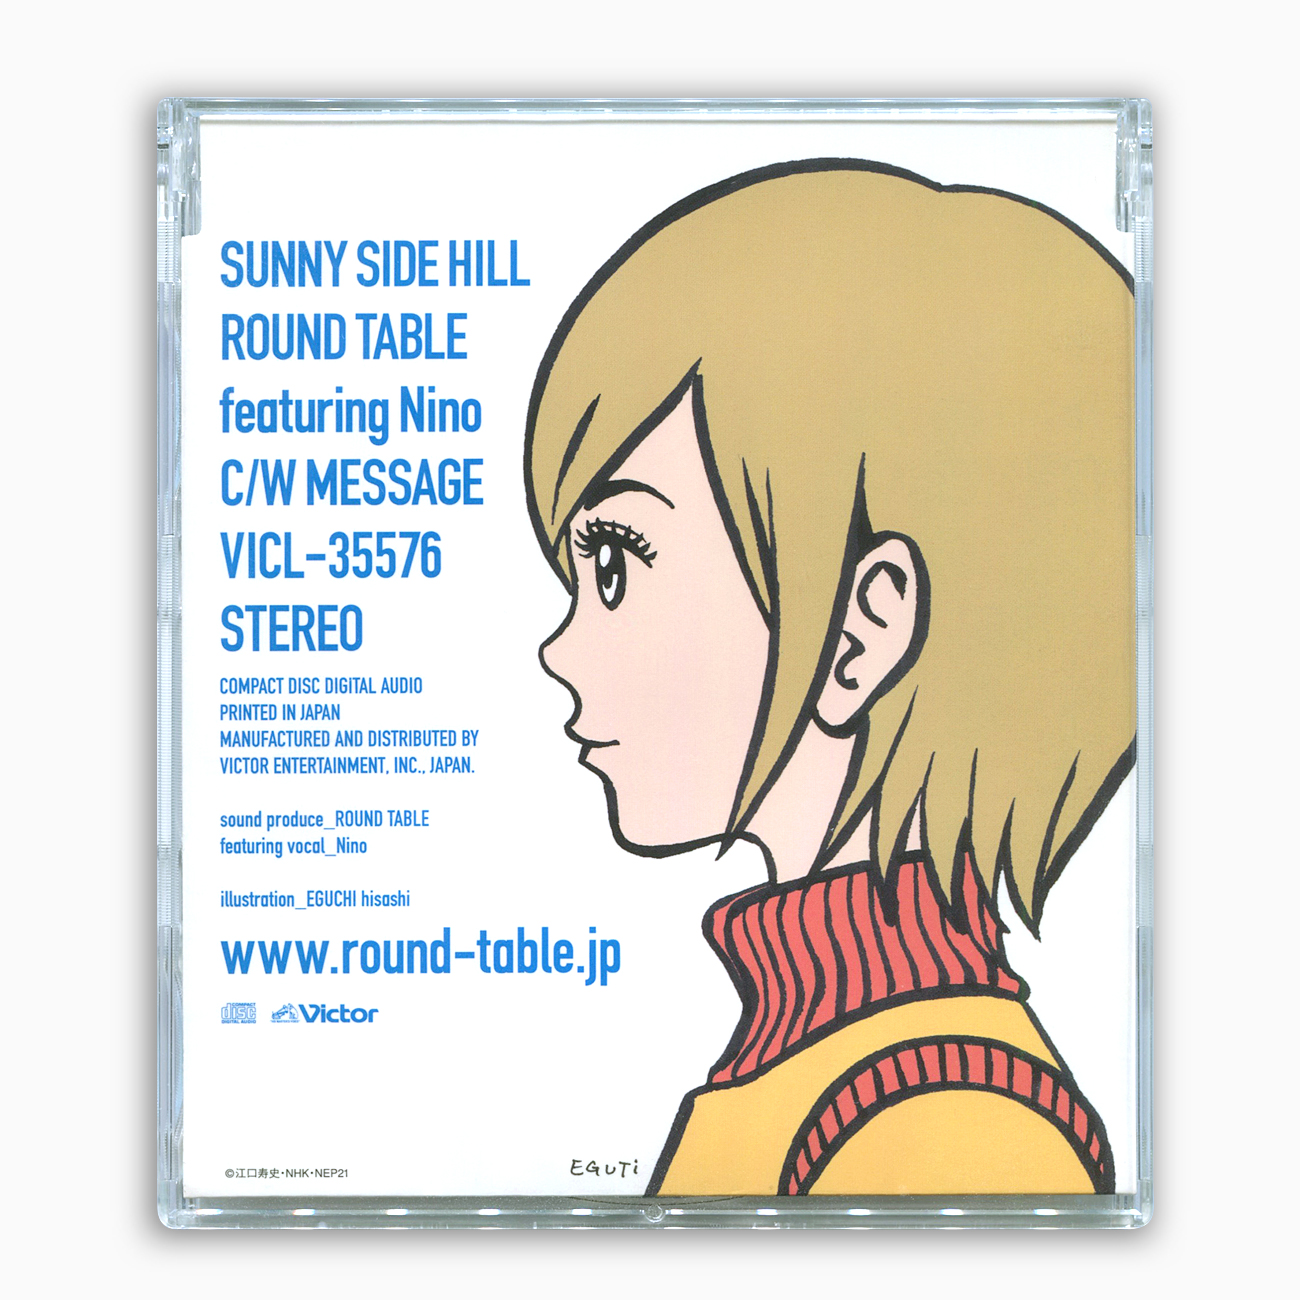 Sunny Side Hill ROUND TABLE feat. Nino